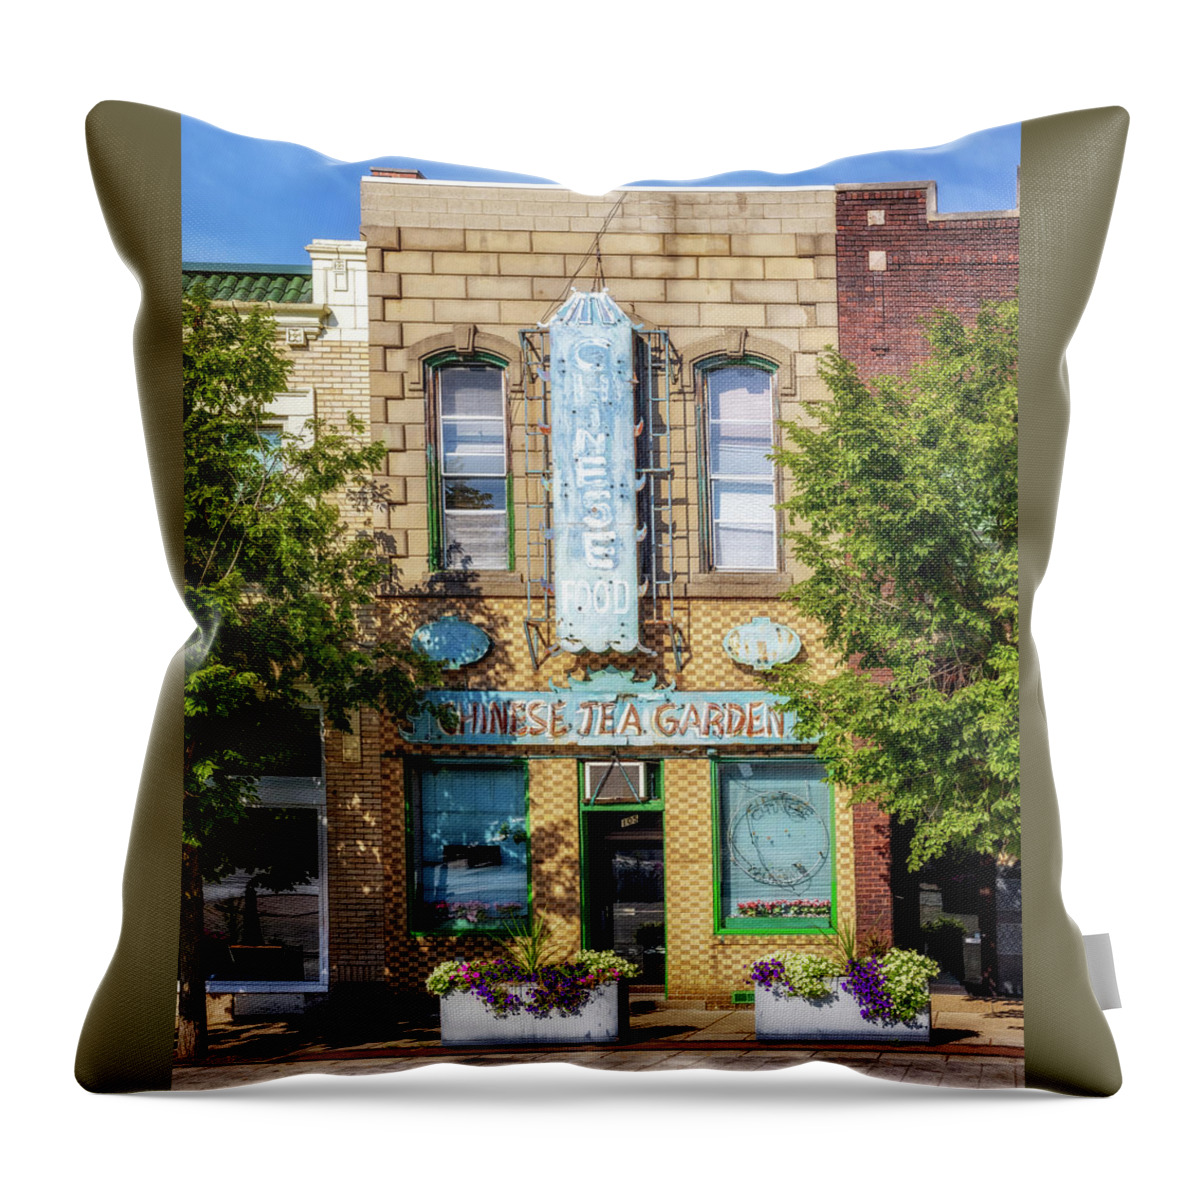 Chinese Tea Garden Throw Pillow featuring the photograph Chinese Tea Garden - Decatur, Illinois by Susan Rissi Tregoning